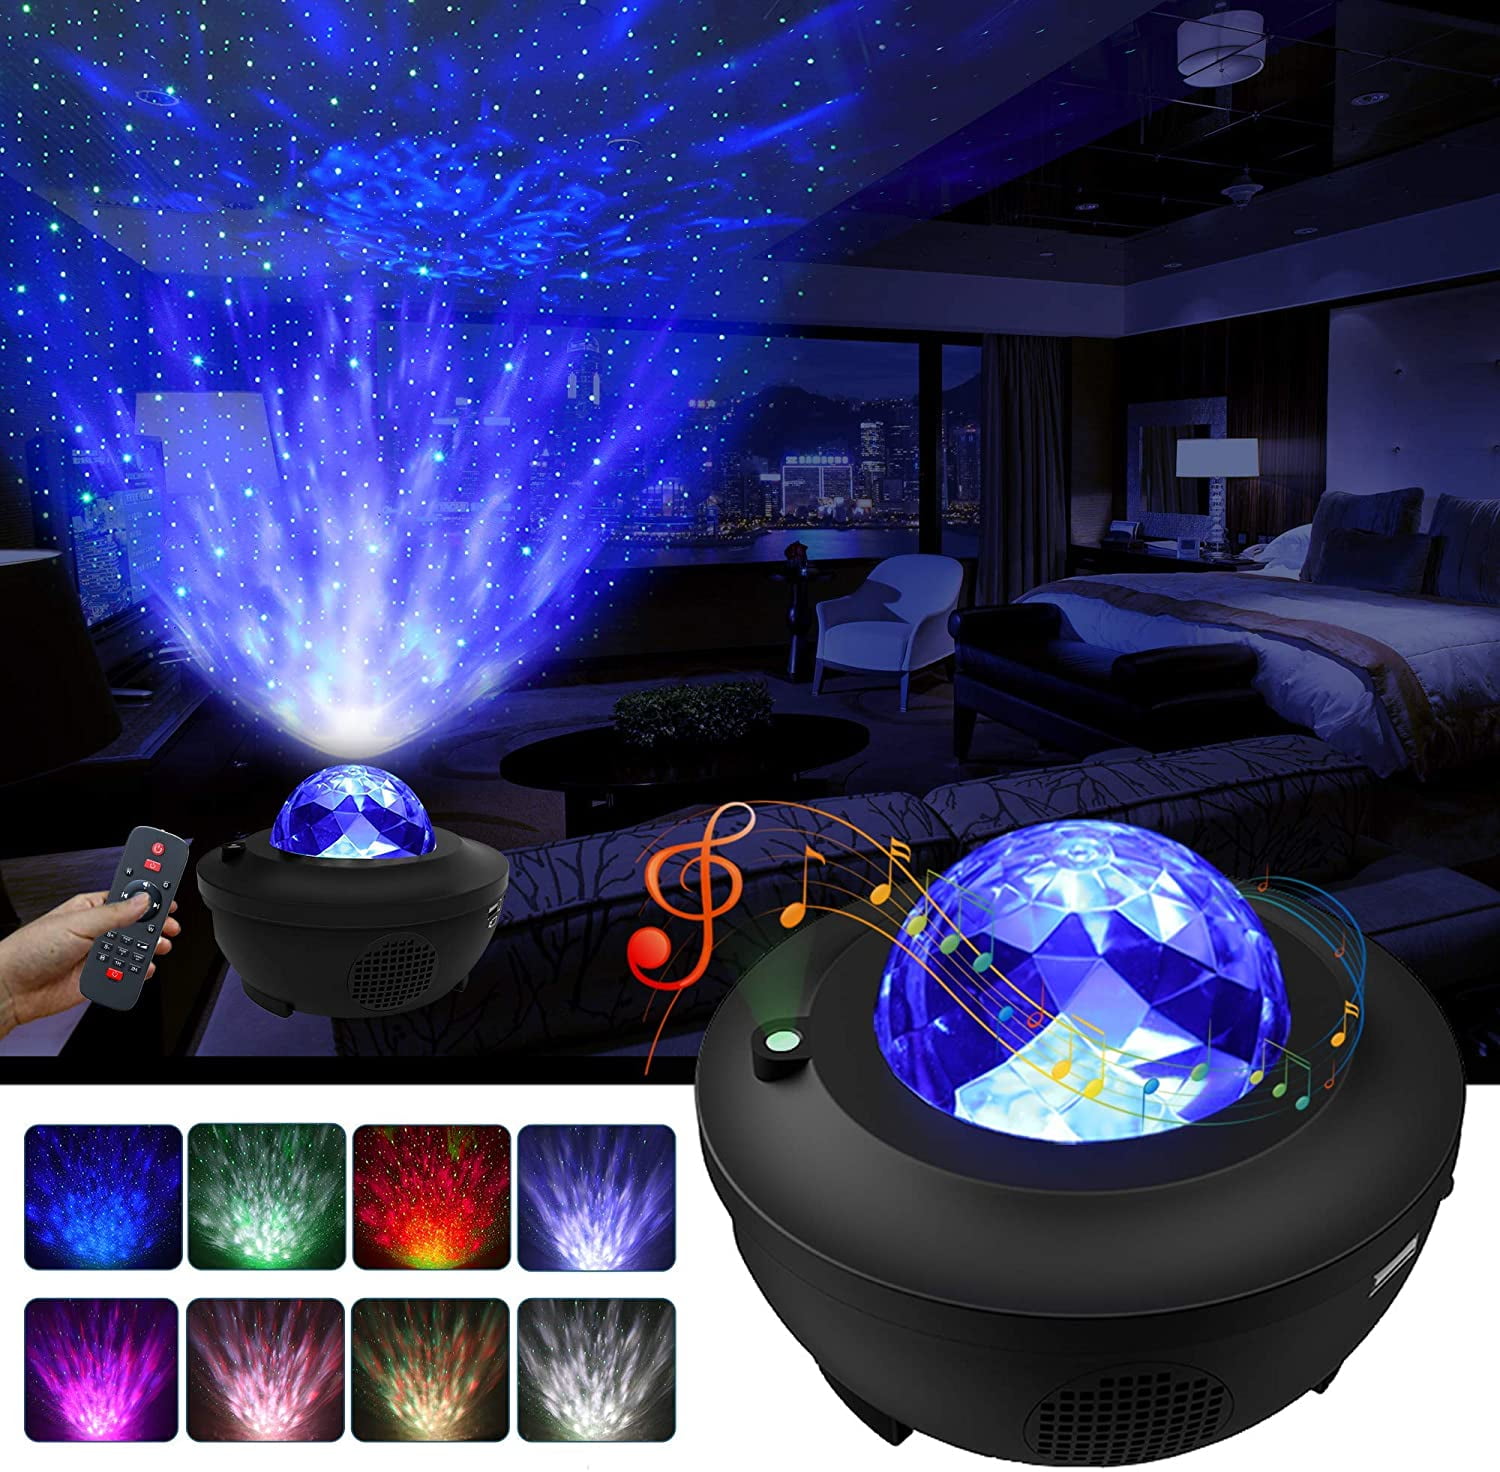 Night Light Ambiance with Bluetooth Music Speaker White Night Light projector With Remote Control,AZIMOM 2 in 1 Star Projector w/LED Nebula Sky Lite Ocean Galaxy Light for Kid Baby Voice Control 